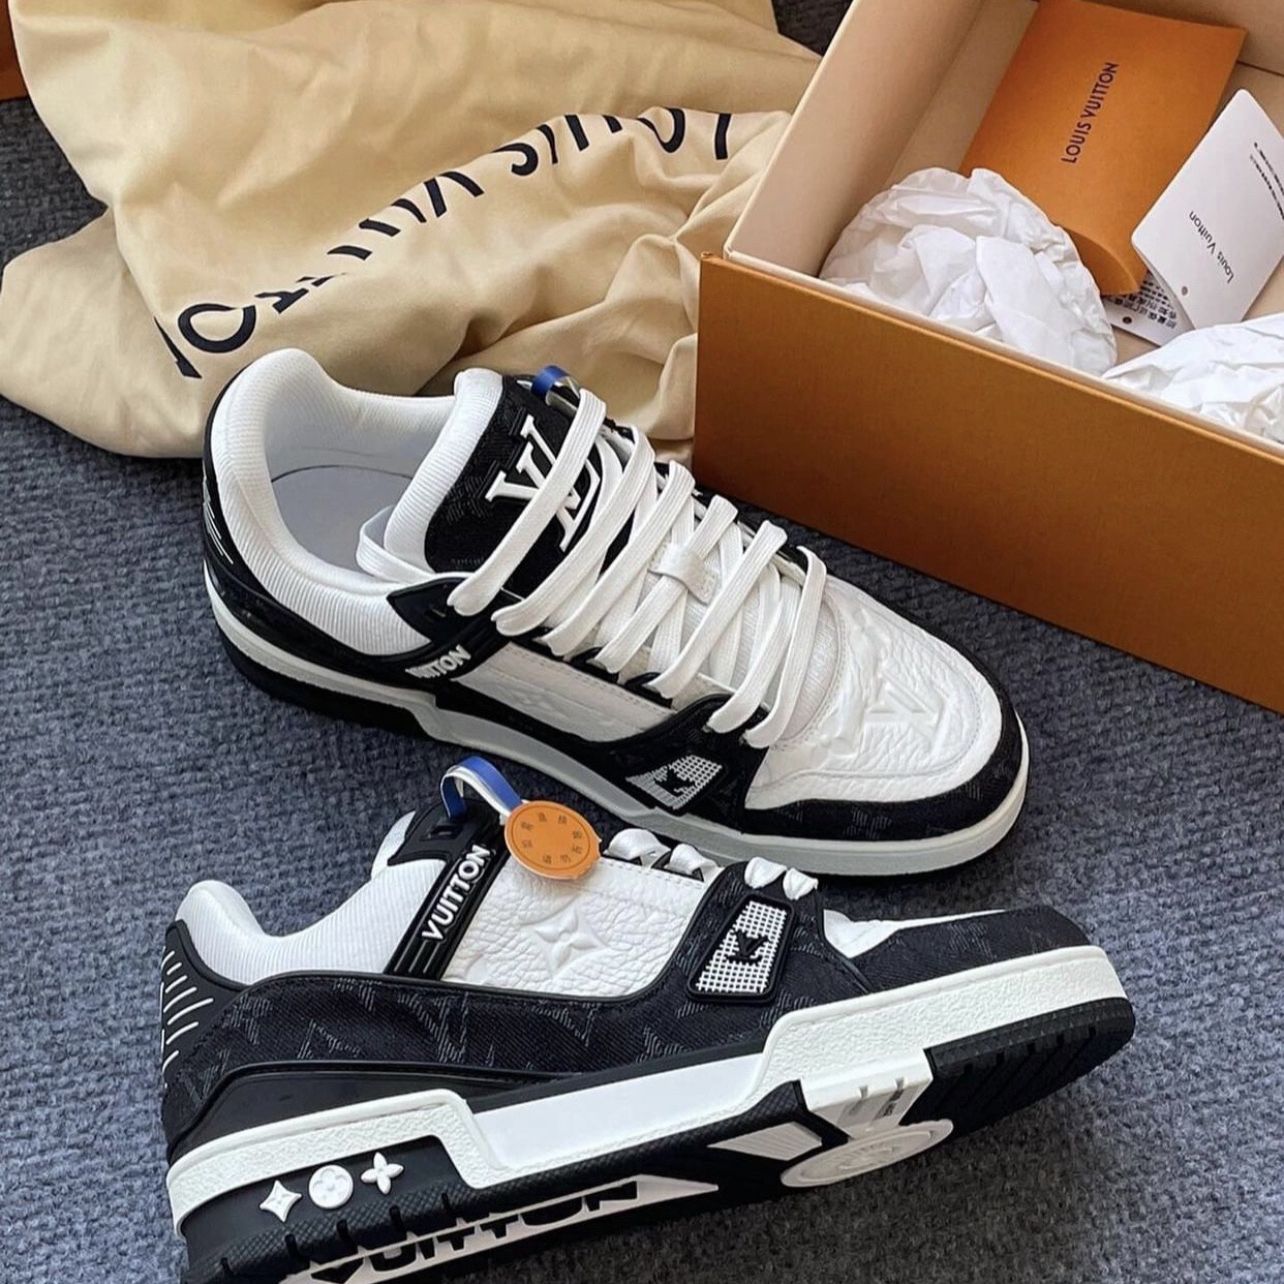 Louis Vuitton Trainers for Sale in Scranton, PA - OfferUp